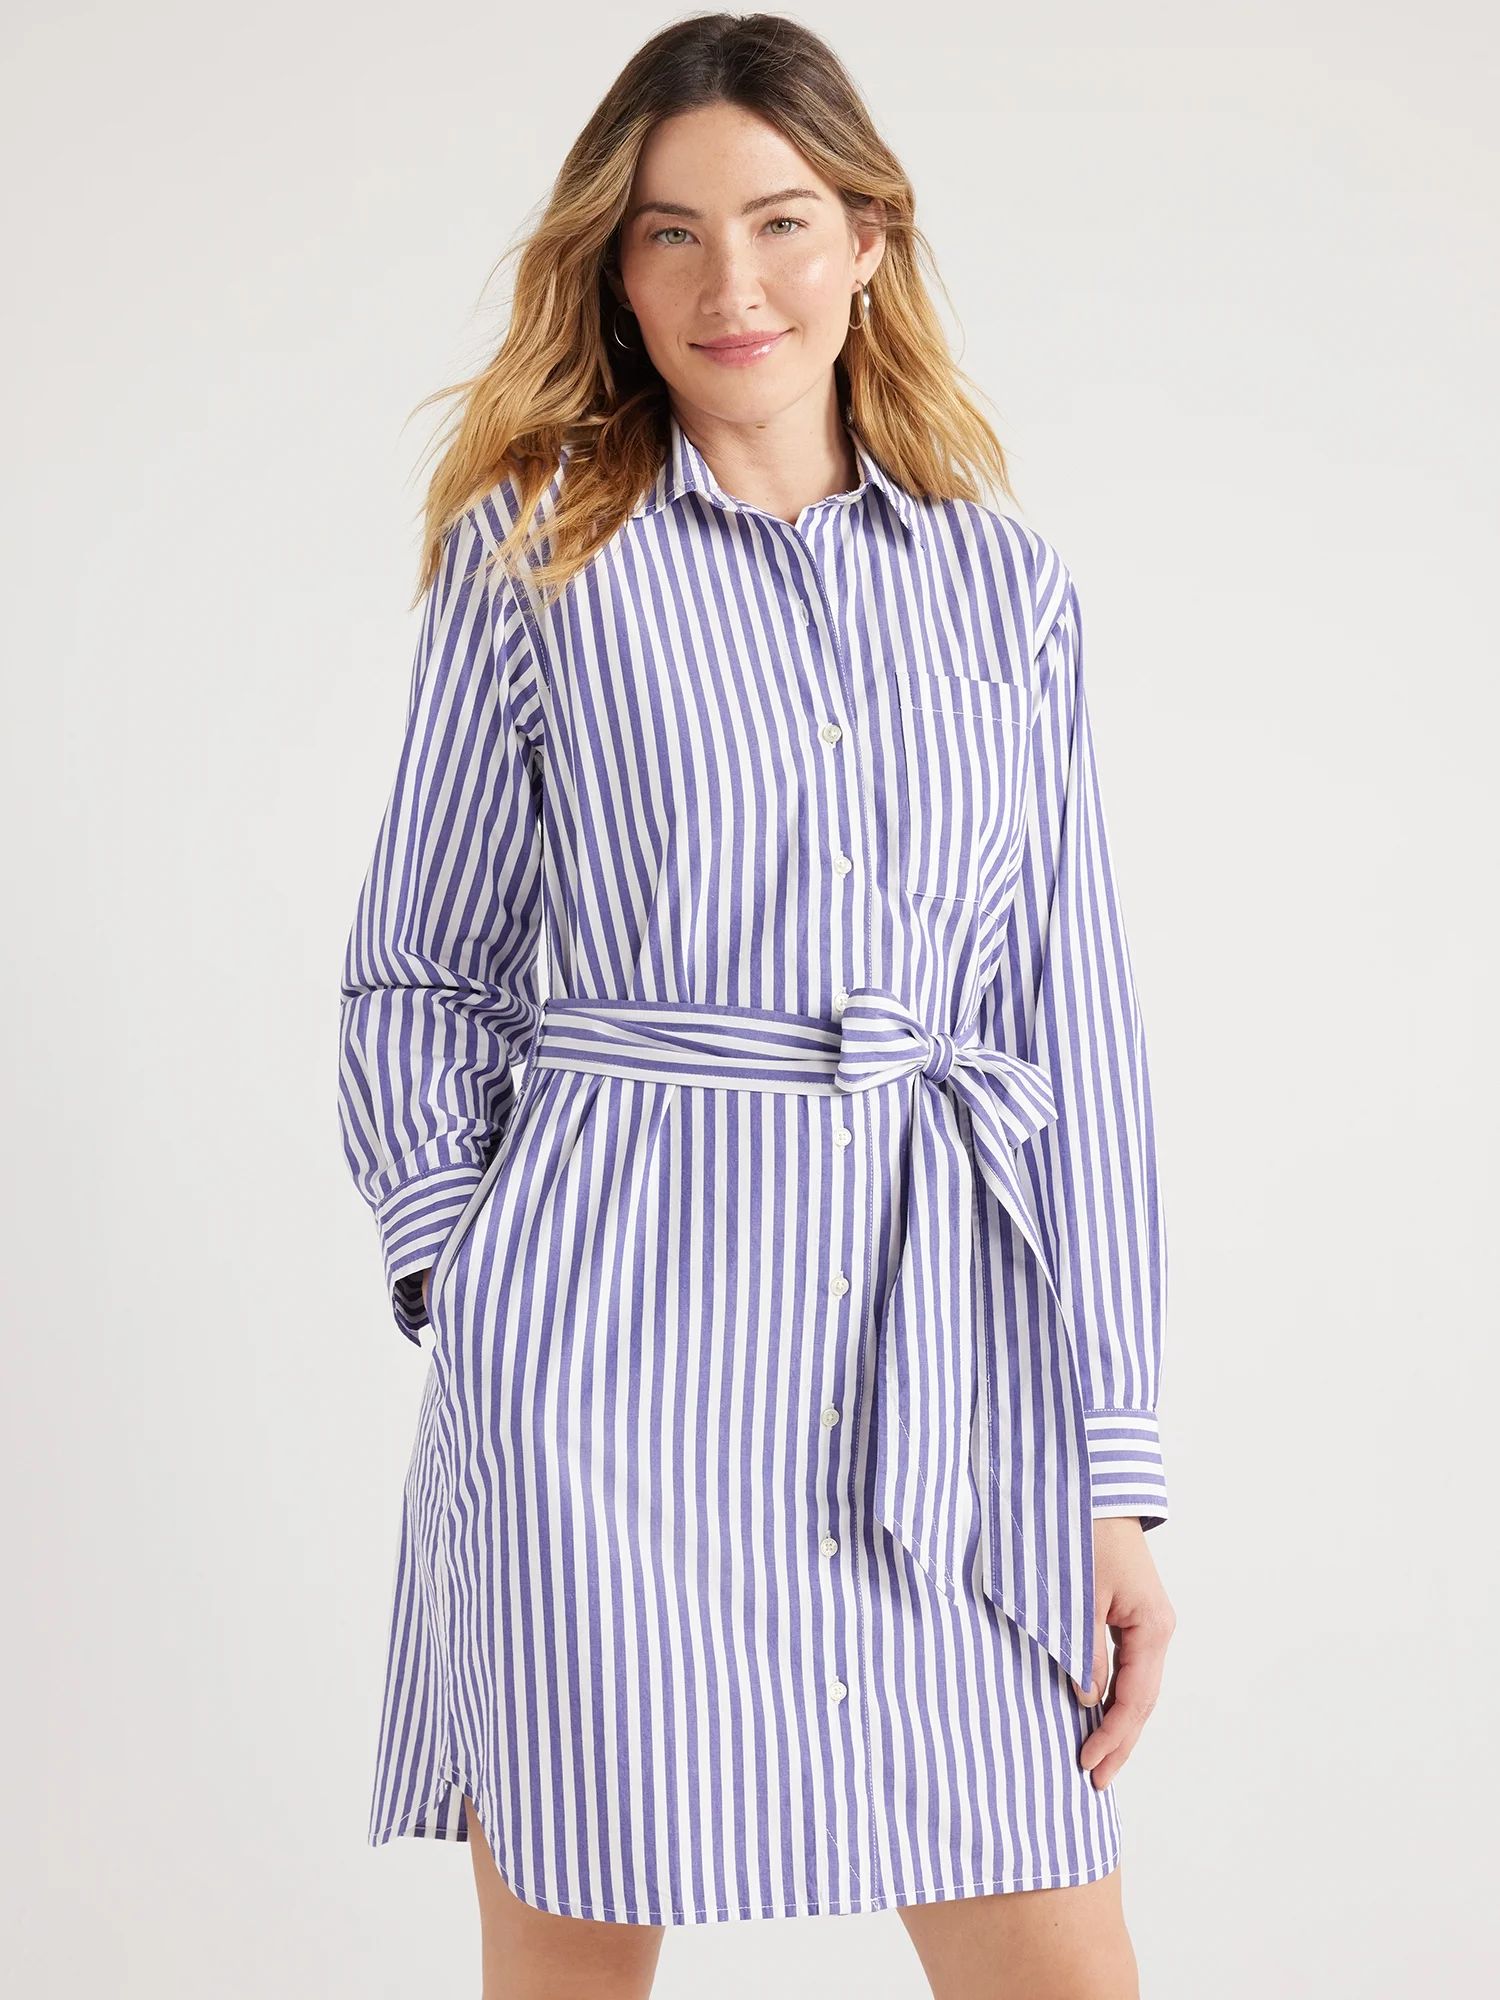 Free Assembly Women’s Cotton Belted Shirtdress with Long Sleeves, Sizes XS-XXL | Walmart (US)